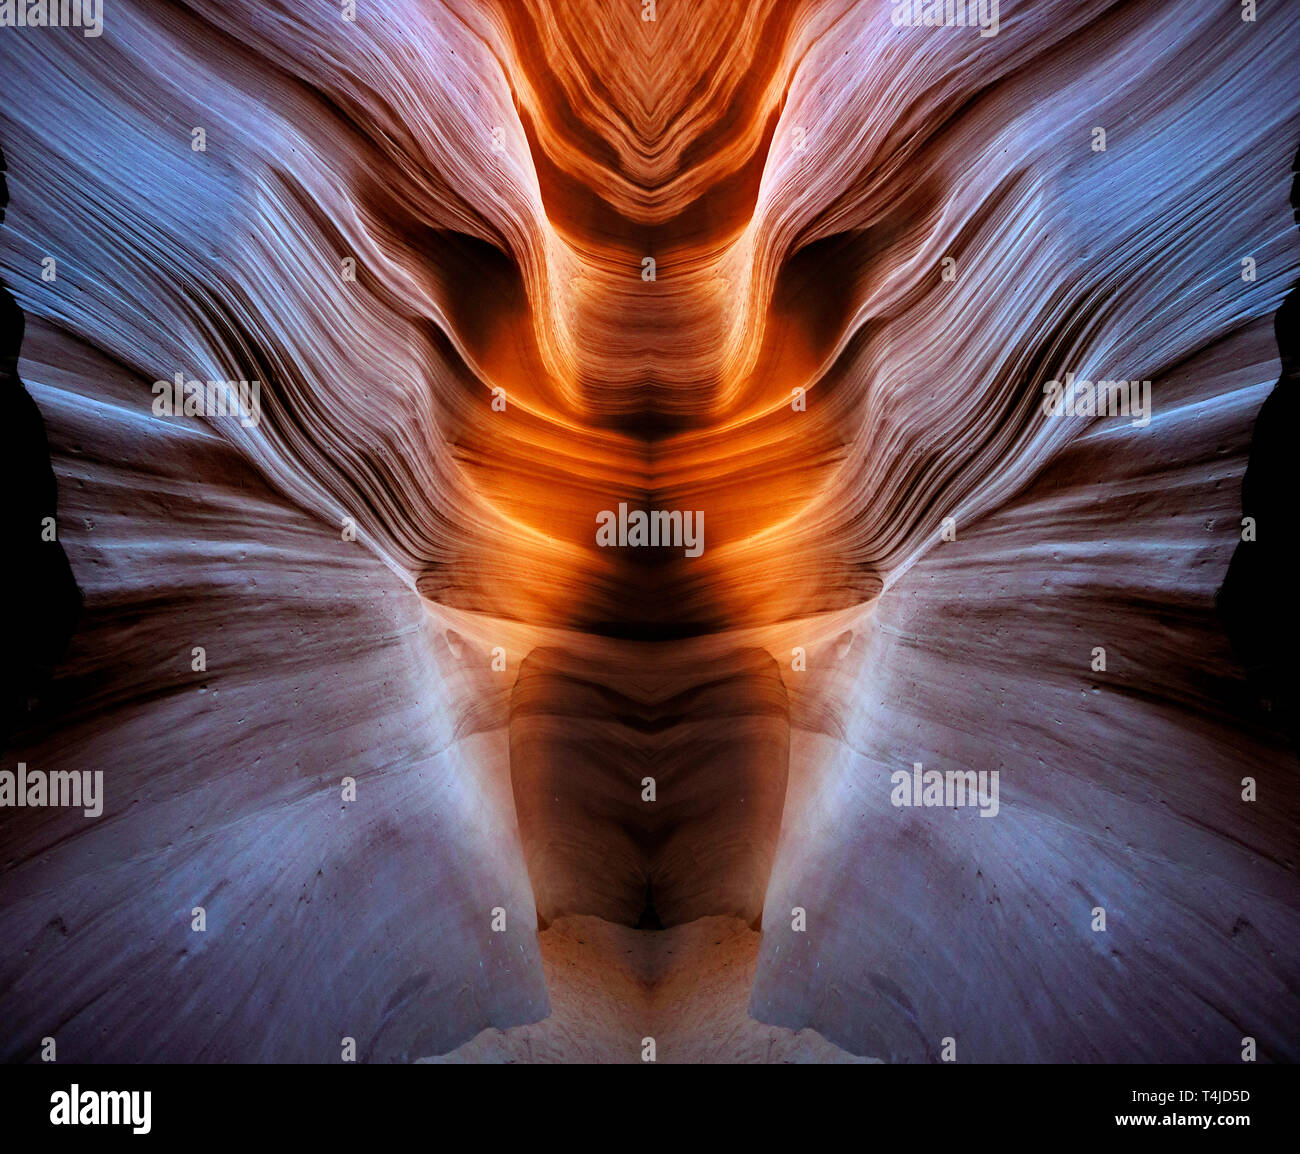 The smooth flowing slot canyons of Arizona. This Image was created by combining two symmetrical images, reversing one half to produce a unique design. Stock Photo